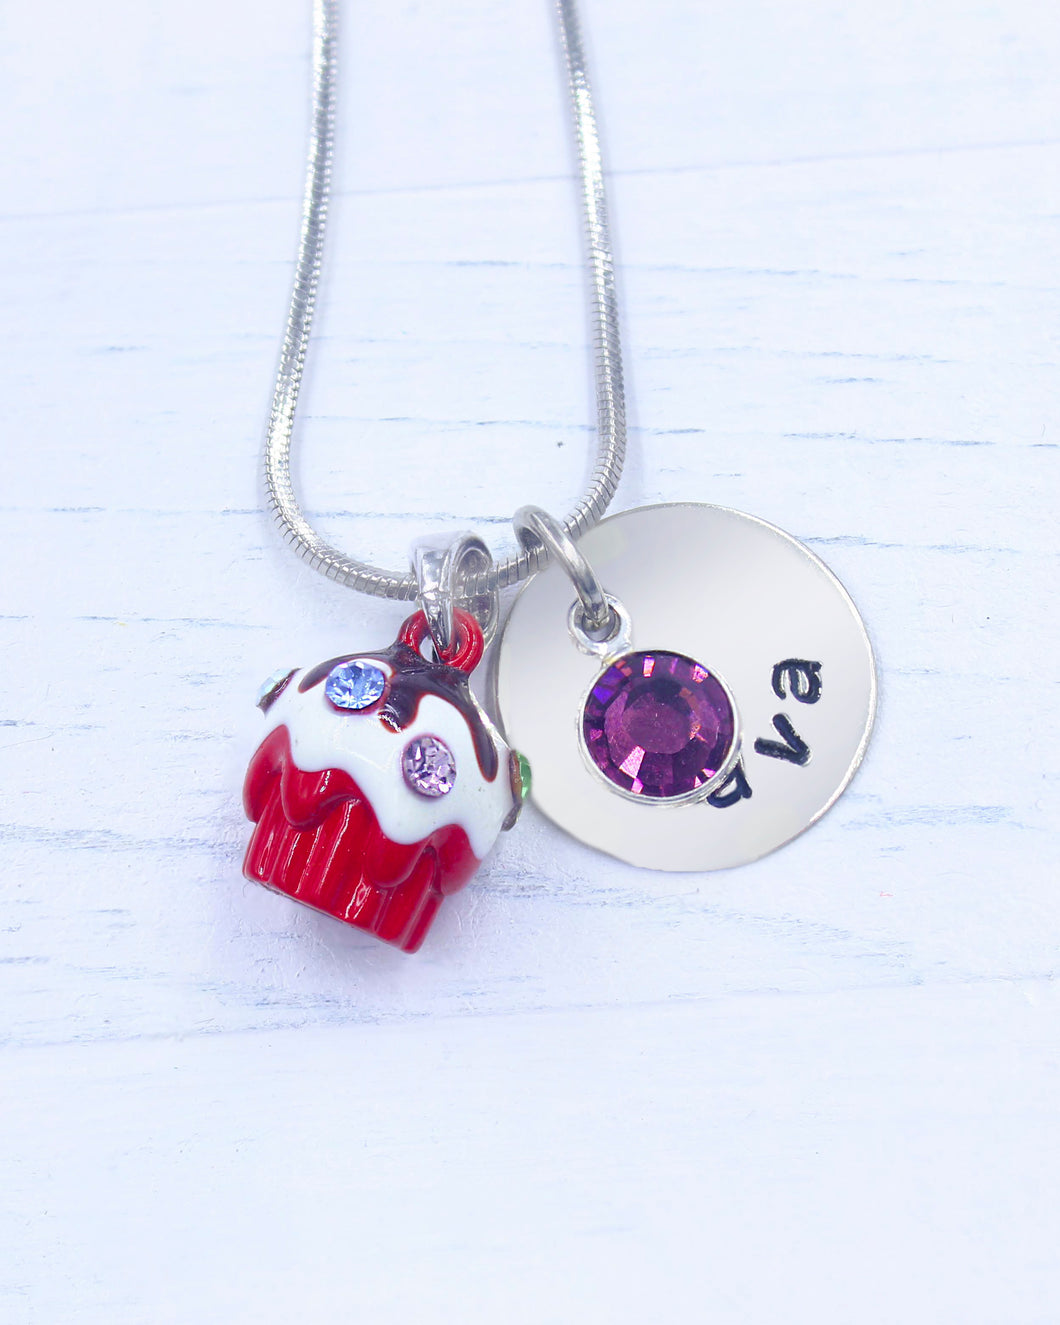 Cupcake Necklace | Cupcake Gift | Personalized Necklace | Christmas gifts for mom | Christmas gifts for her | Christmas gifts for women